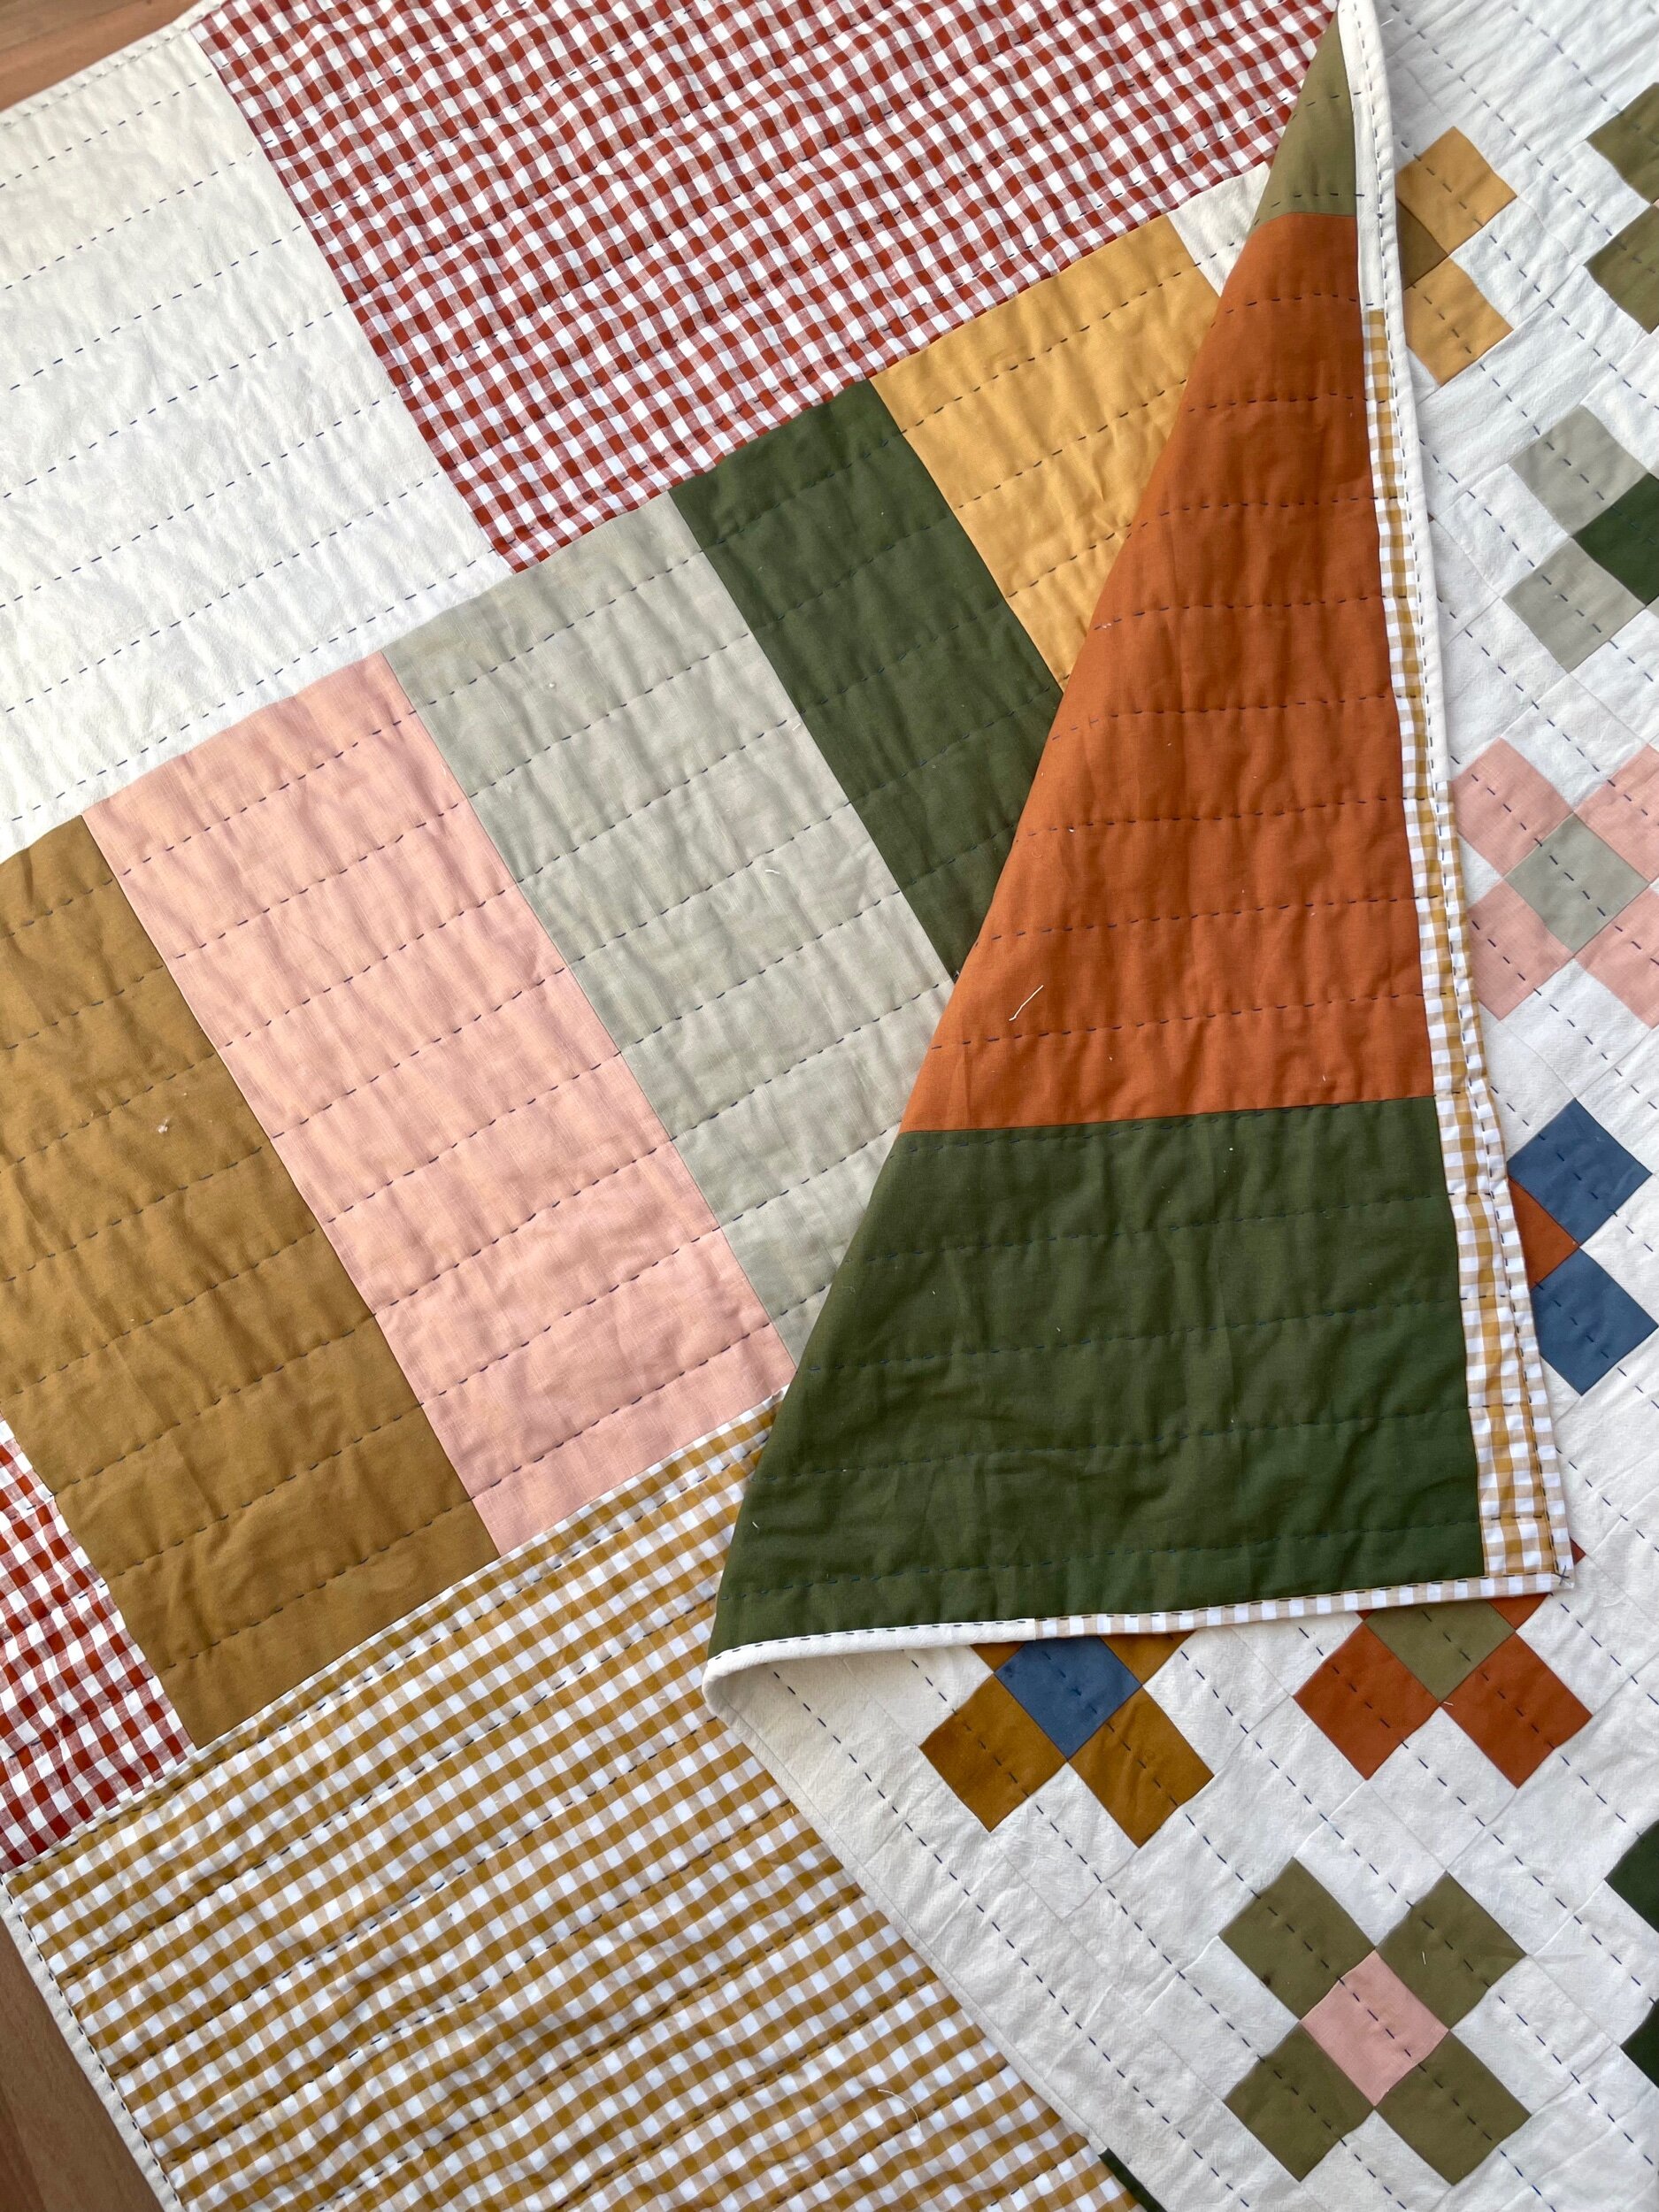 How To Hand Quilt (Hand Quilting Tutorial, Instruction and Tips)